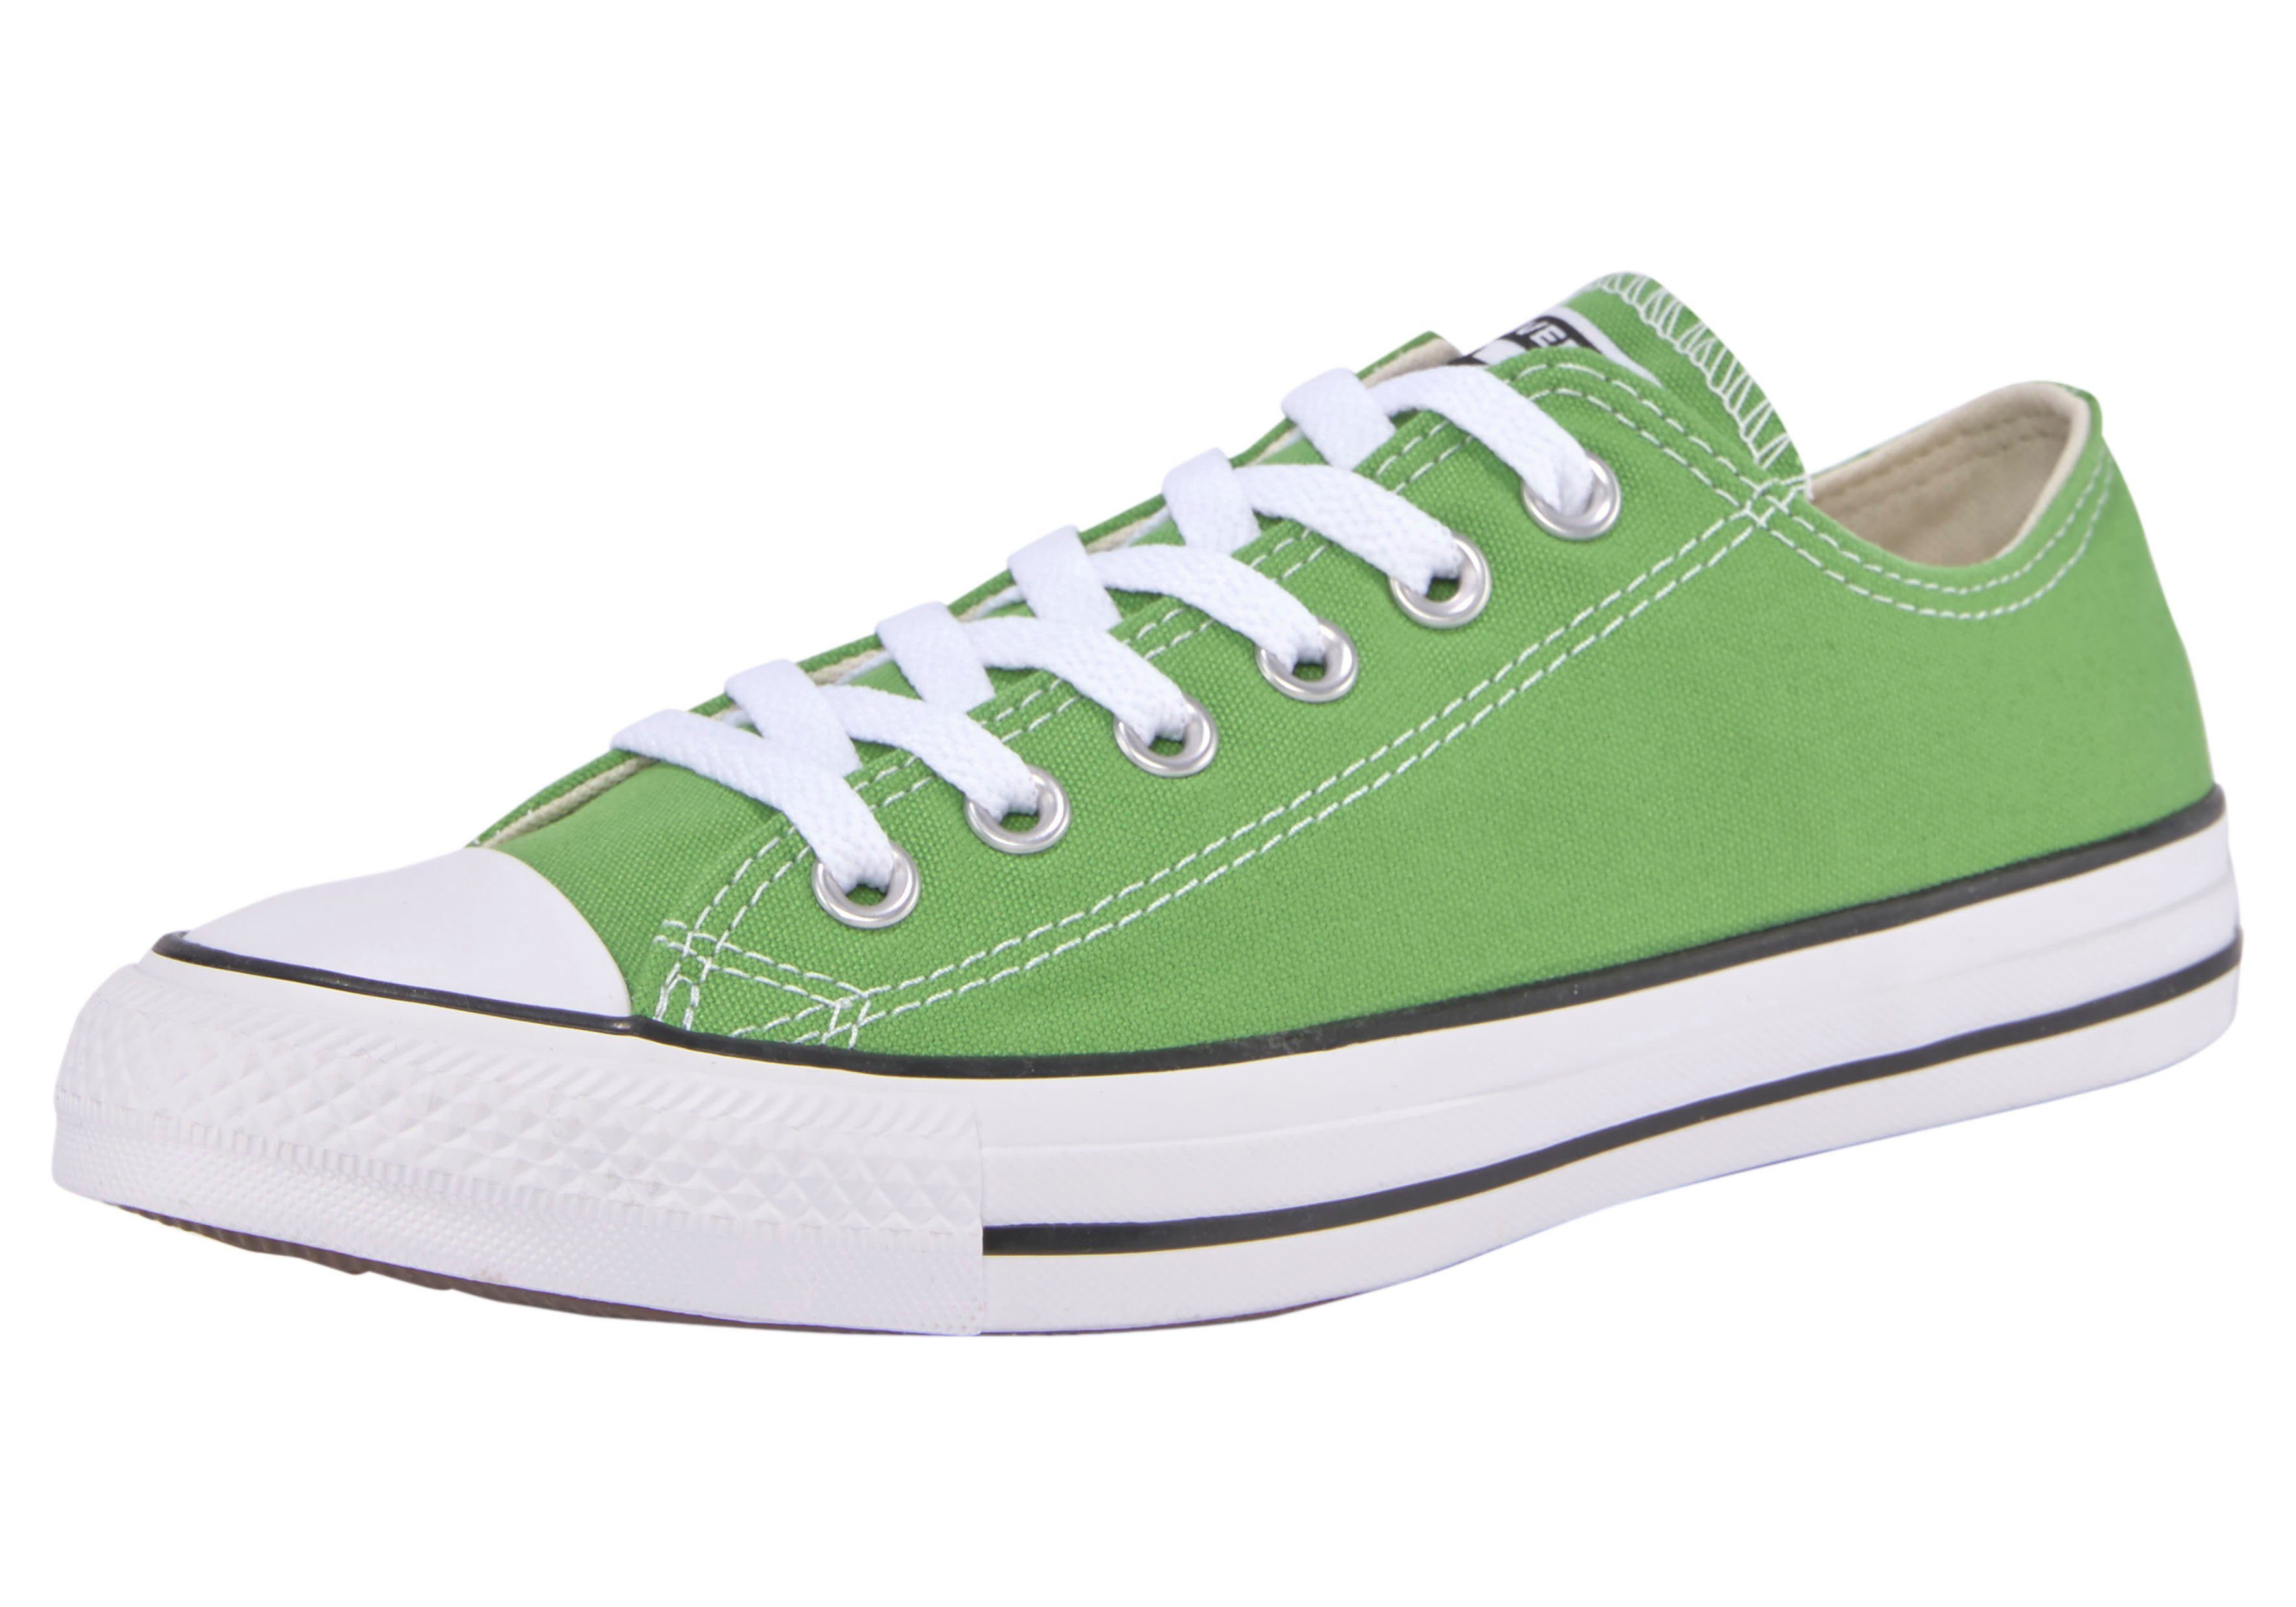 Schuhe Sneaker Converse Chuck Taylor All Star PARTIALLY RECYCLED COTTON OX Sneaker